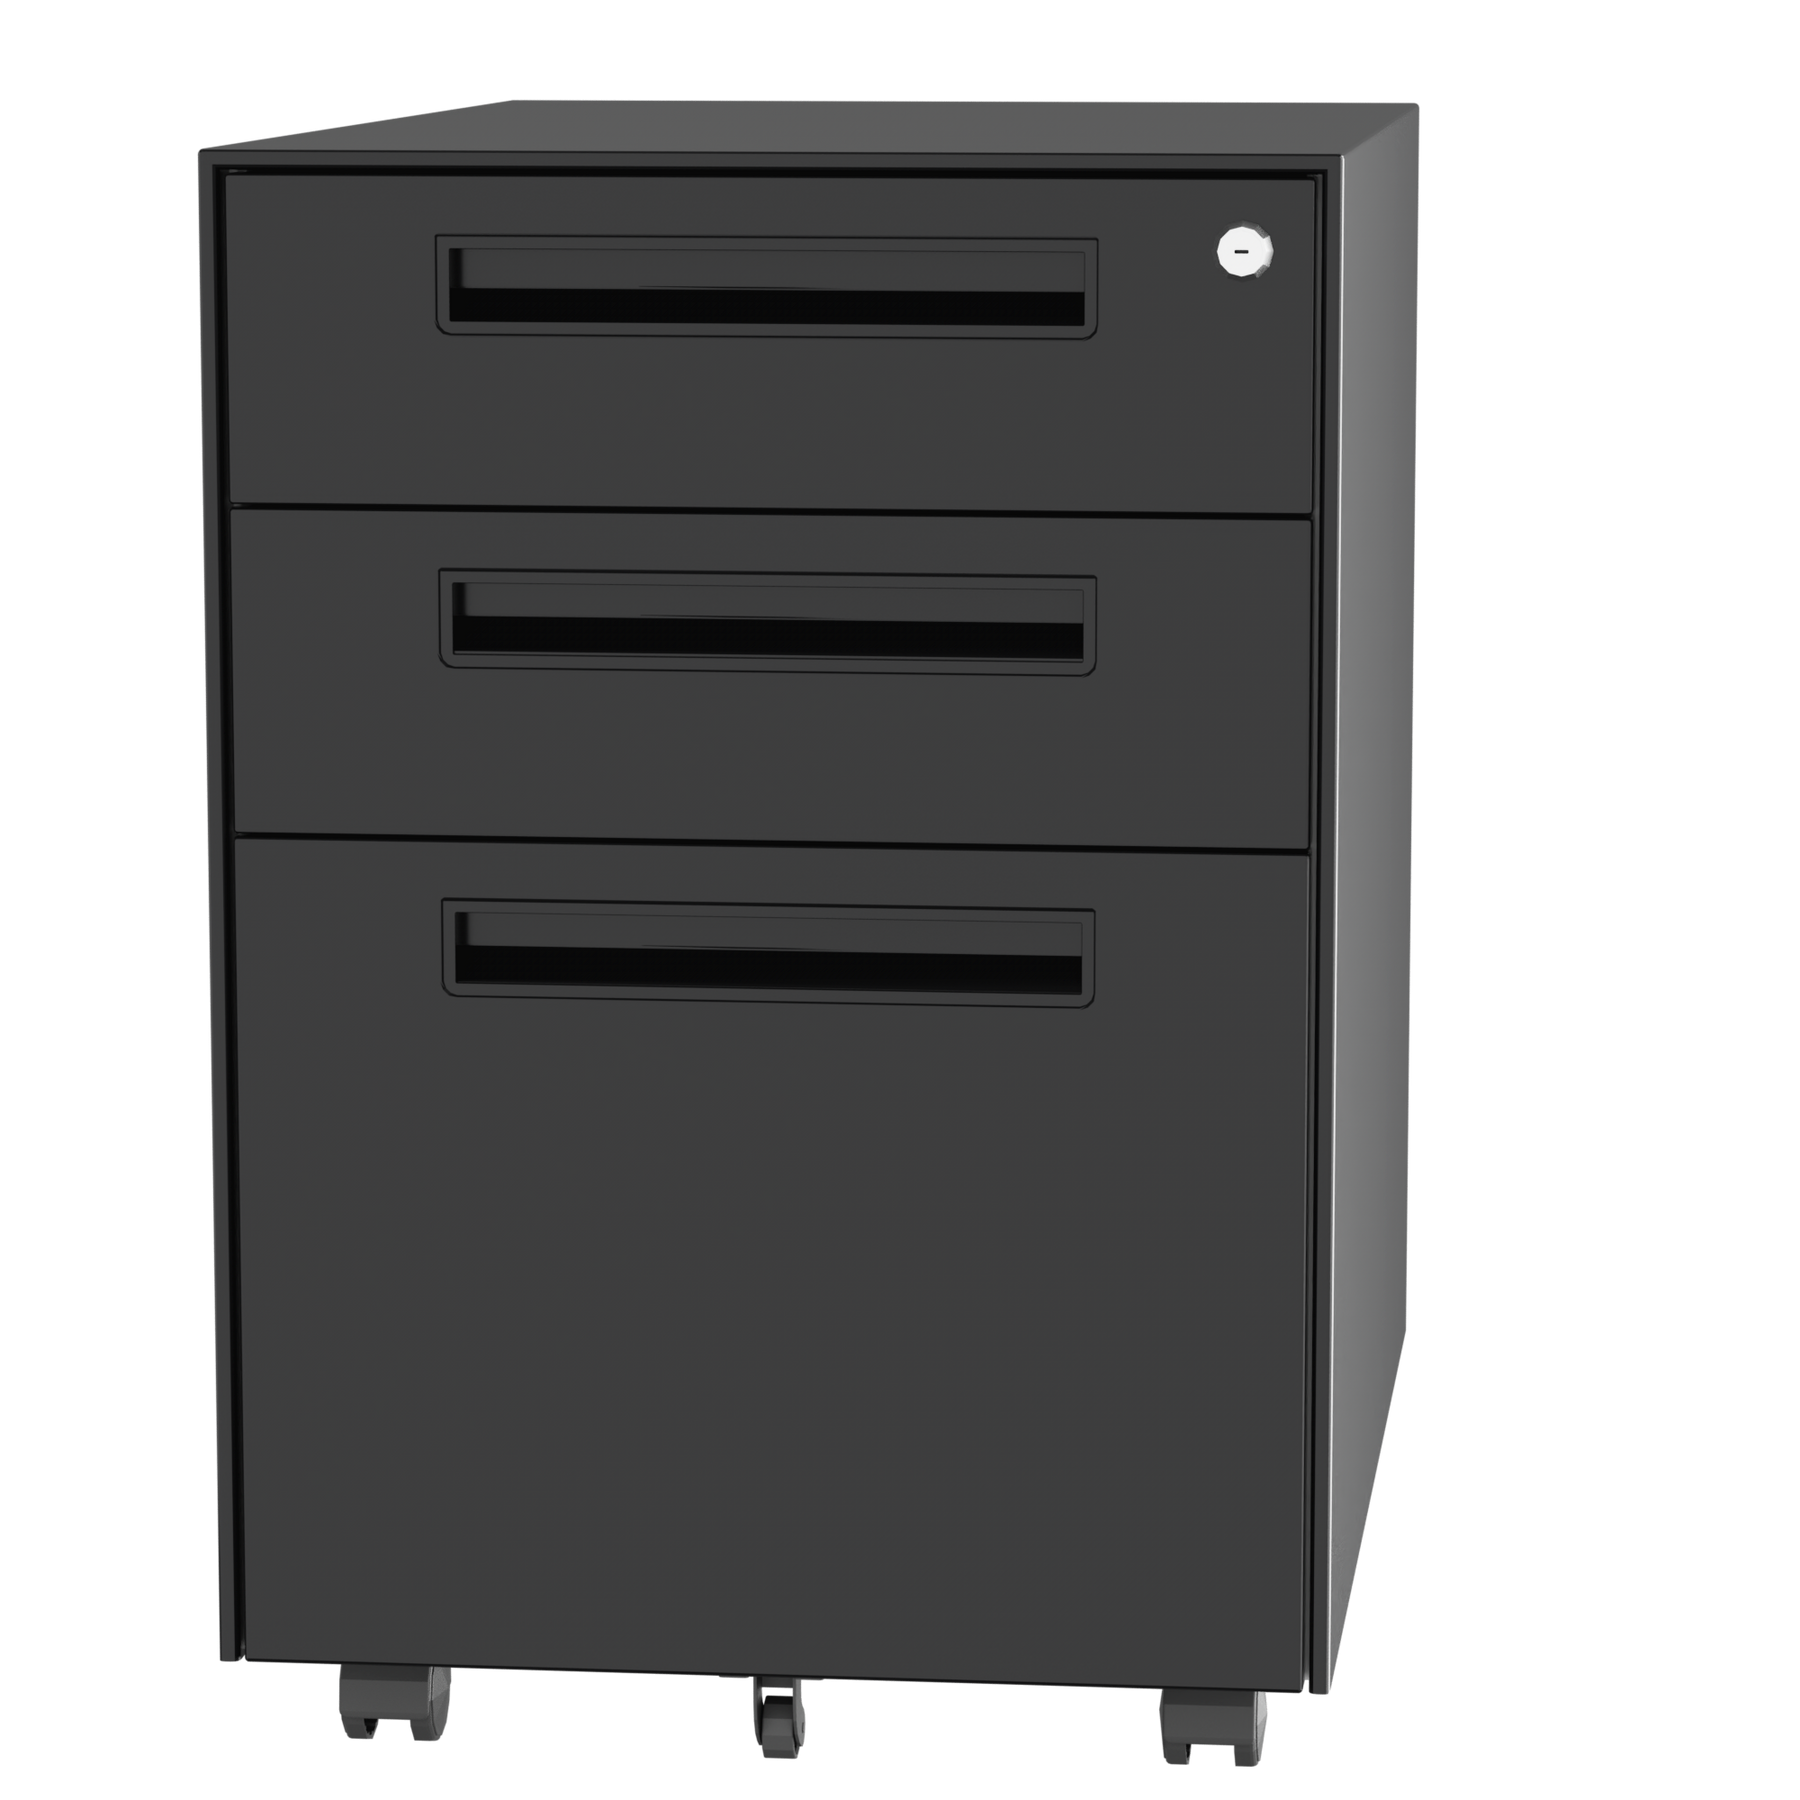 3 Drawer Metal Mobile Vertical Locking File Cabinet with Lock, Under Desk Rolling Filing Cabinets for for Home Office